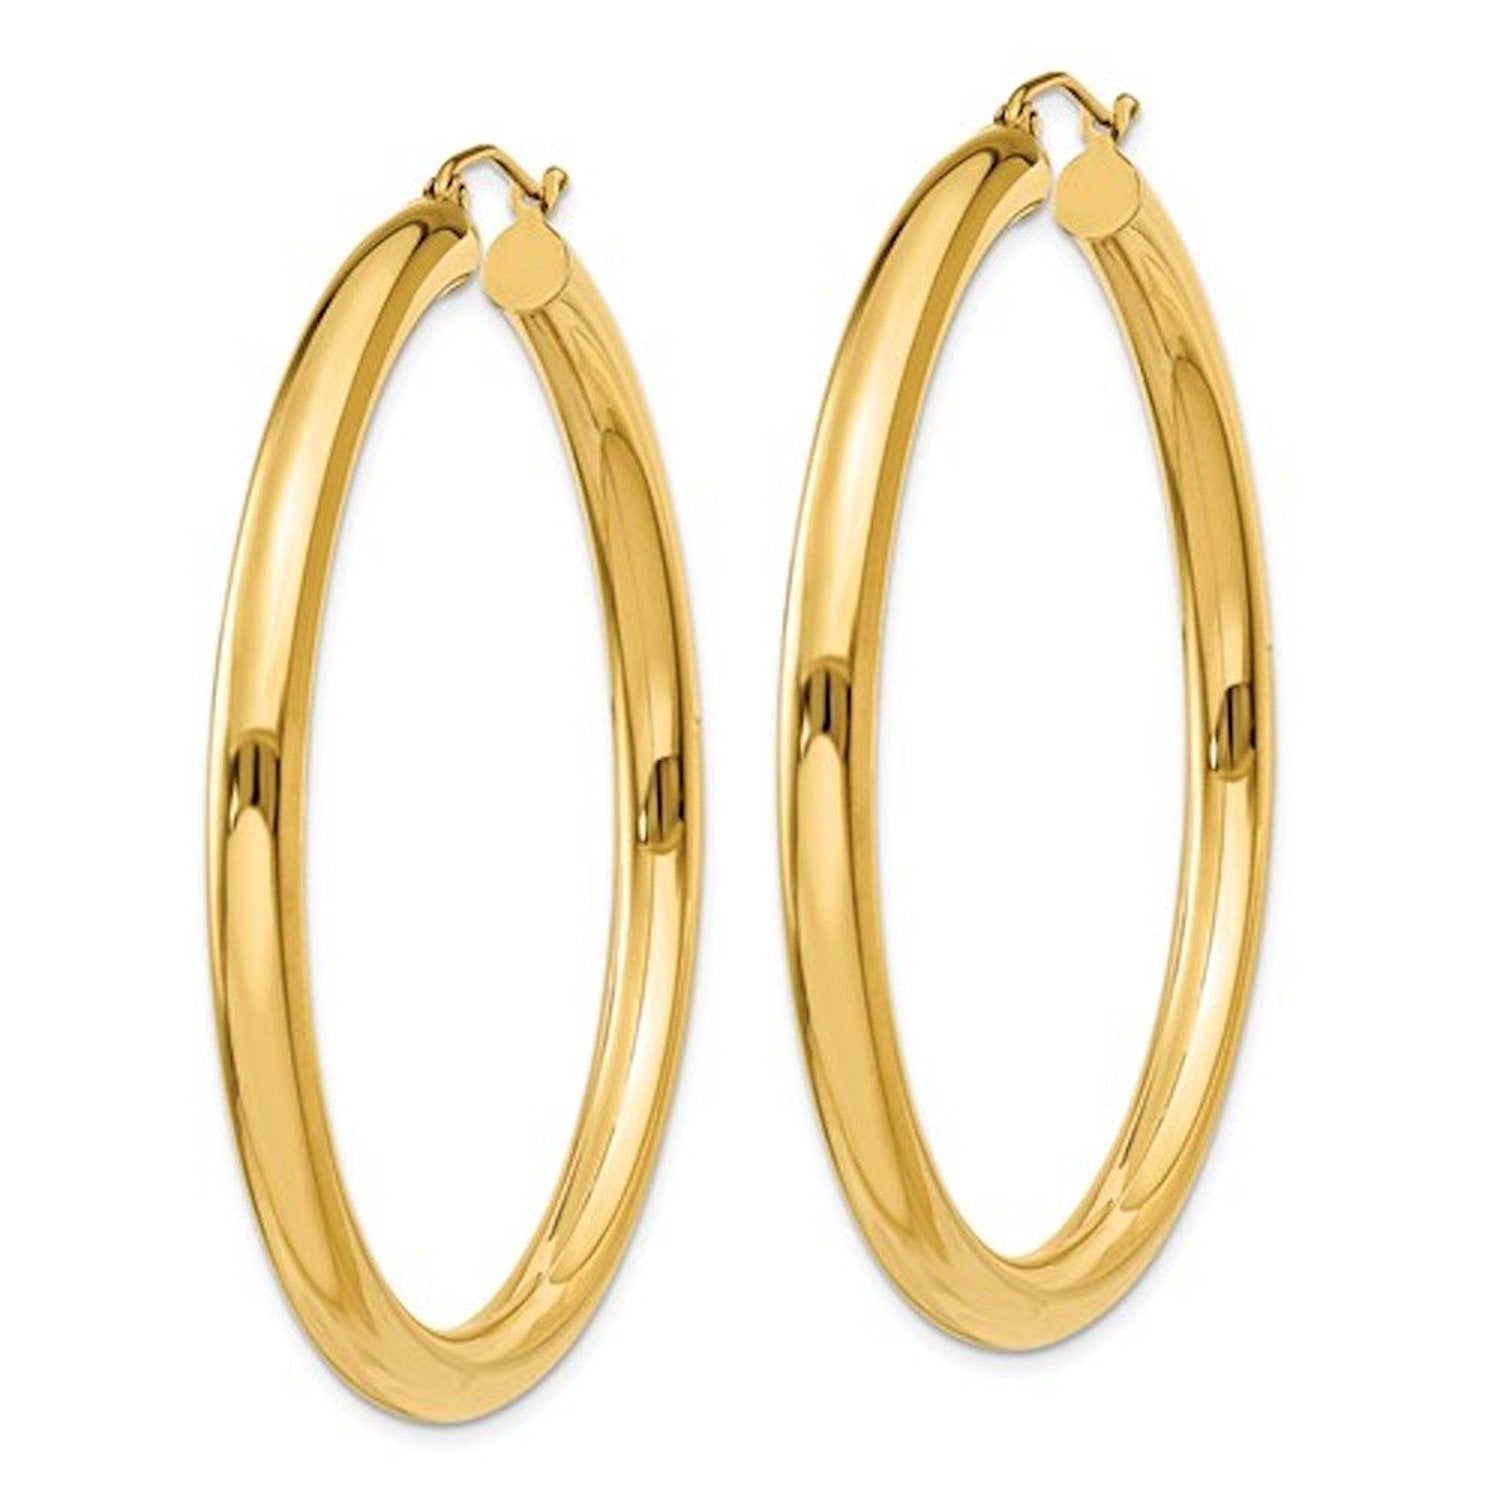 14K Yellow Gold Large Classic Round Hoop Earrings 50mmx4mm